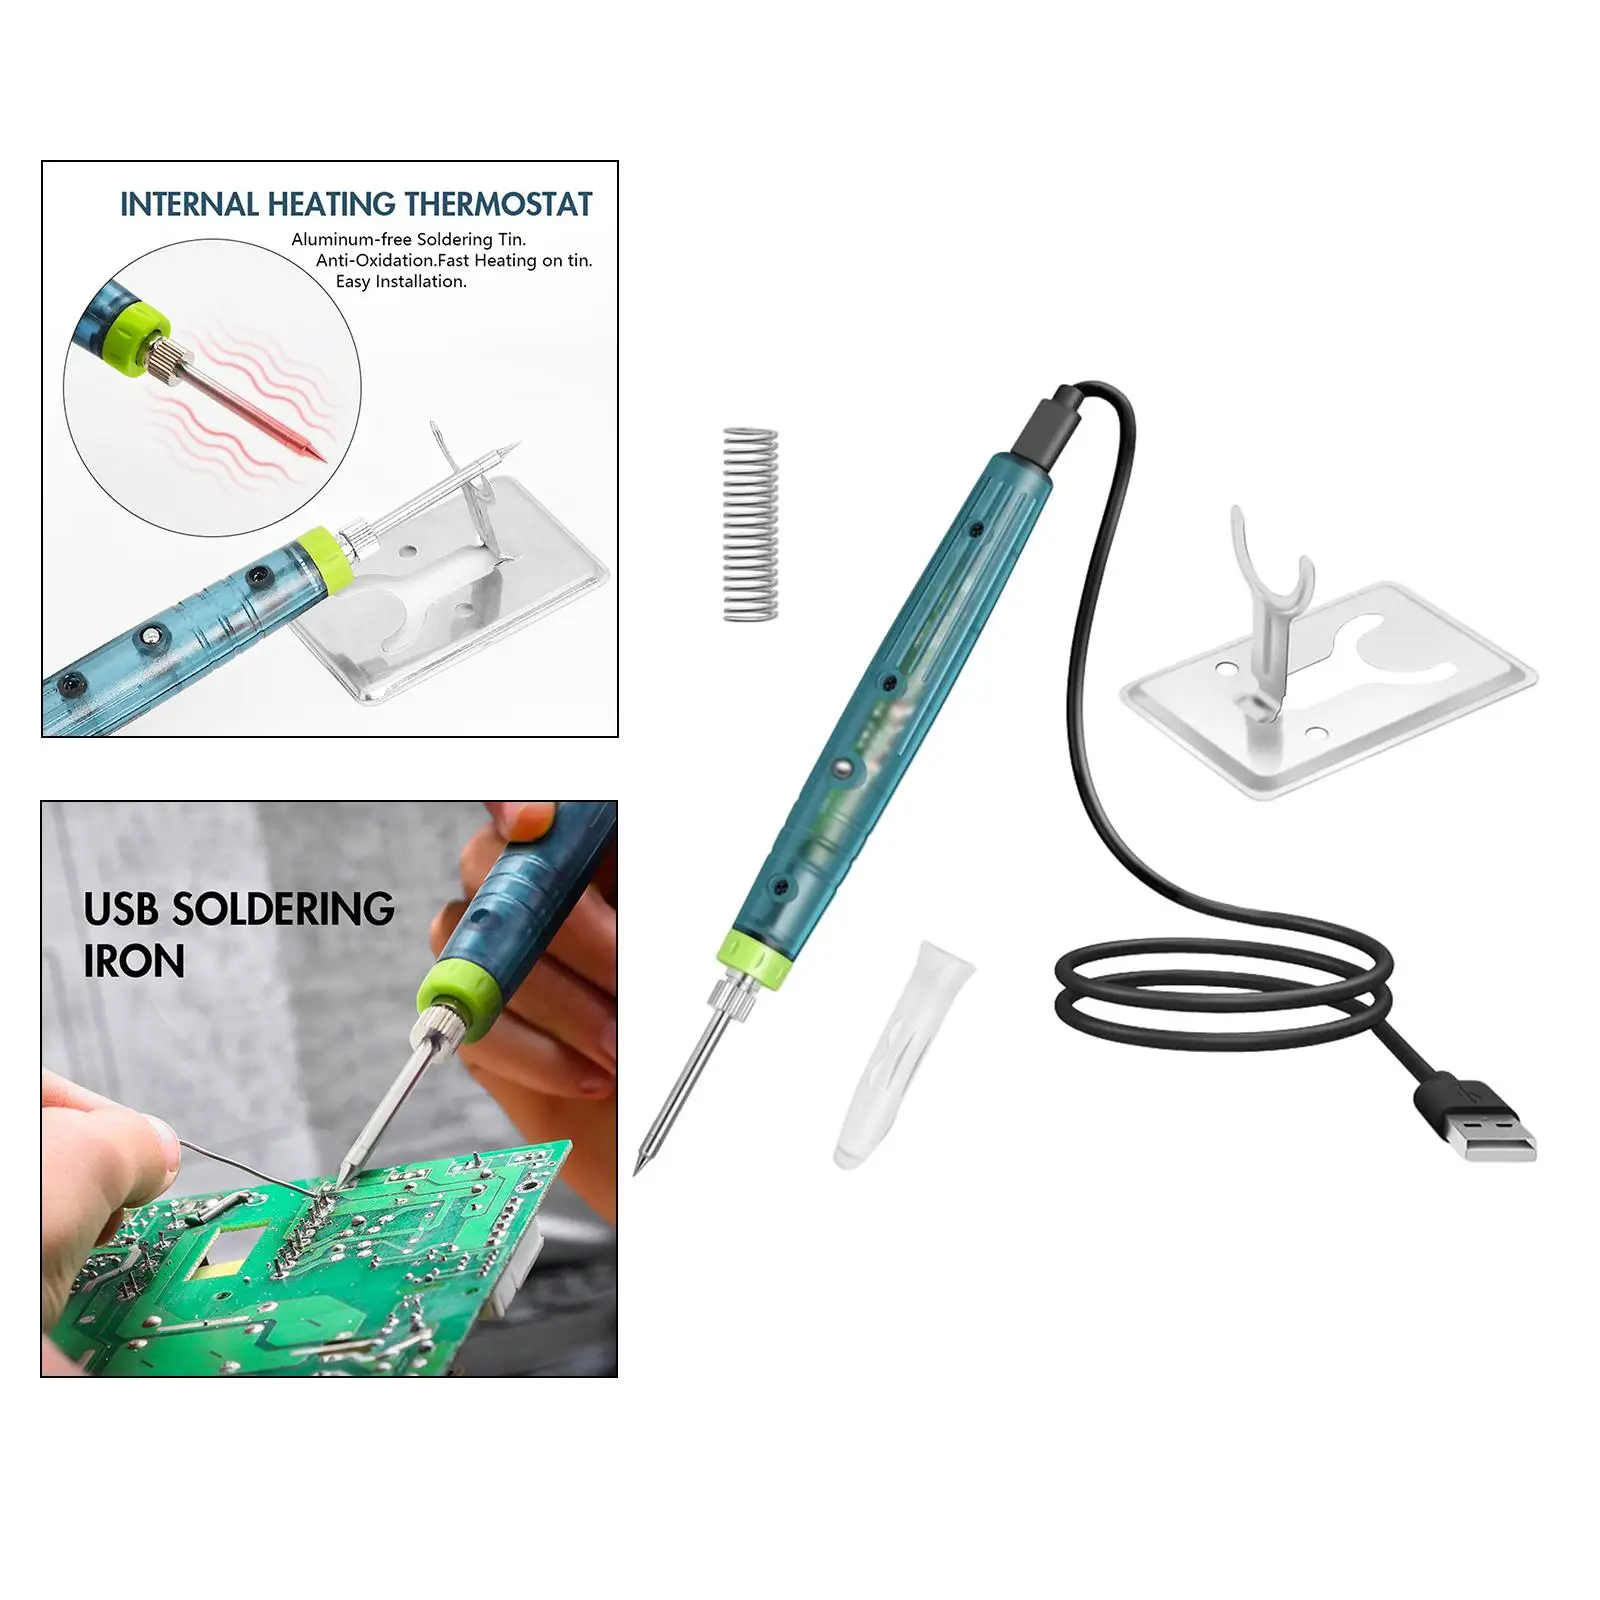 USB Soldering Iron Professional Electronic Soldering Pen Welding Tool with Soldering Iron Stand for Electrical Accessories